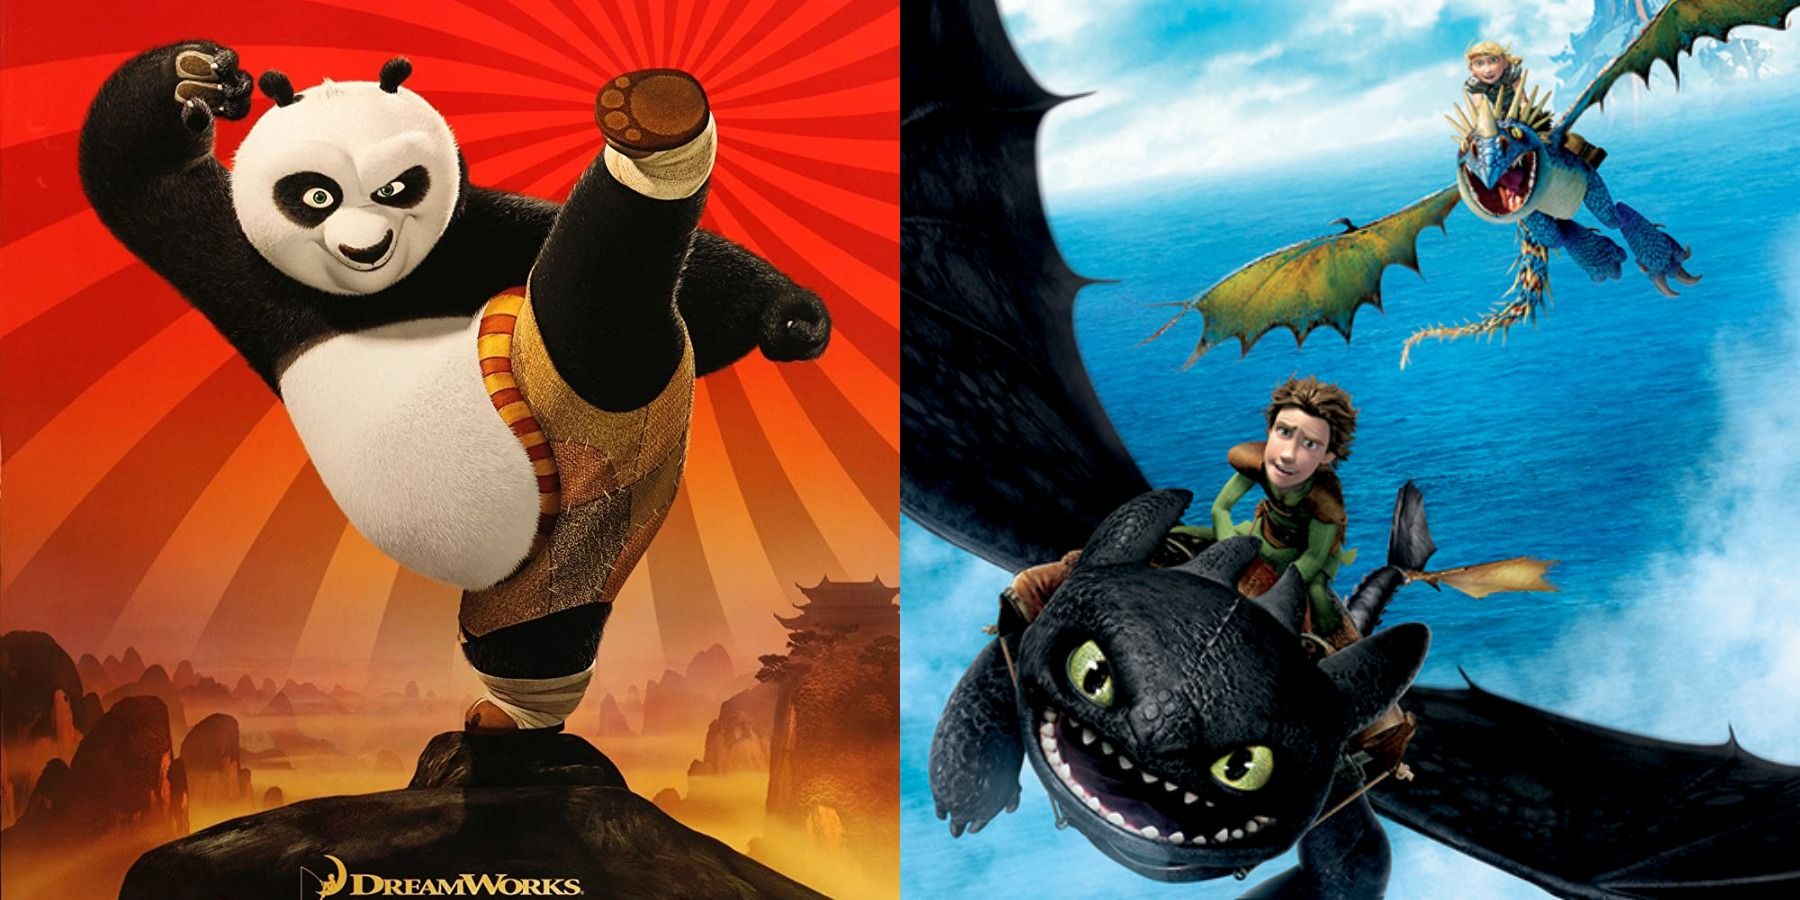 10 Best DreamWorks Animated Movies (& Where To Watch Them)